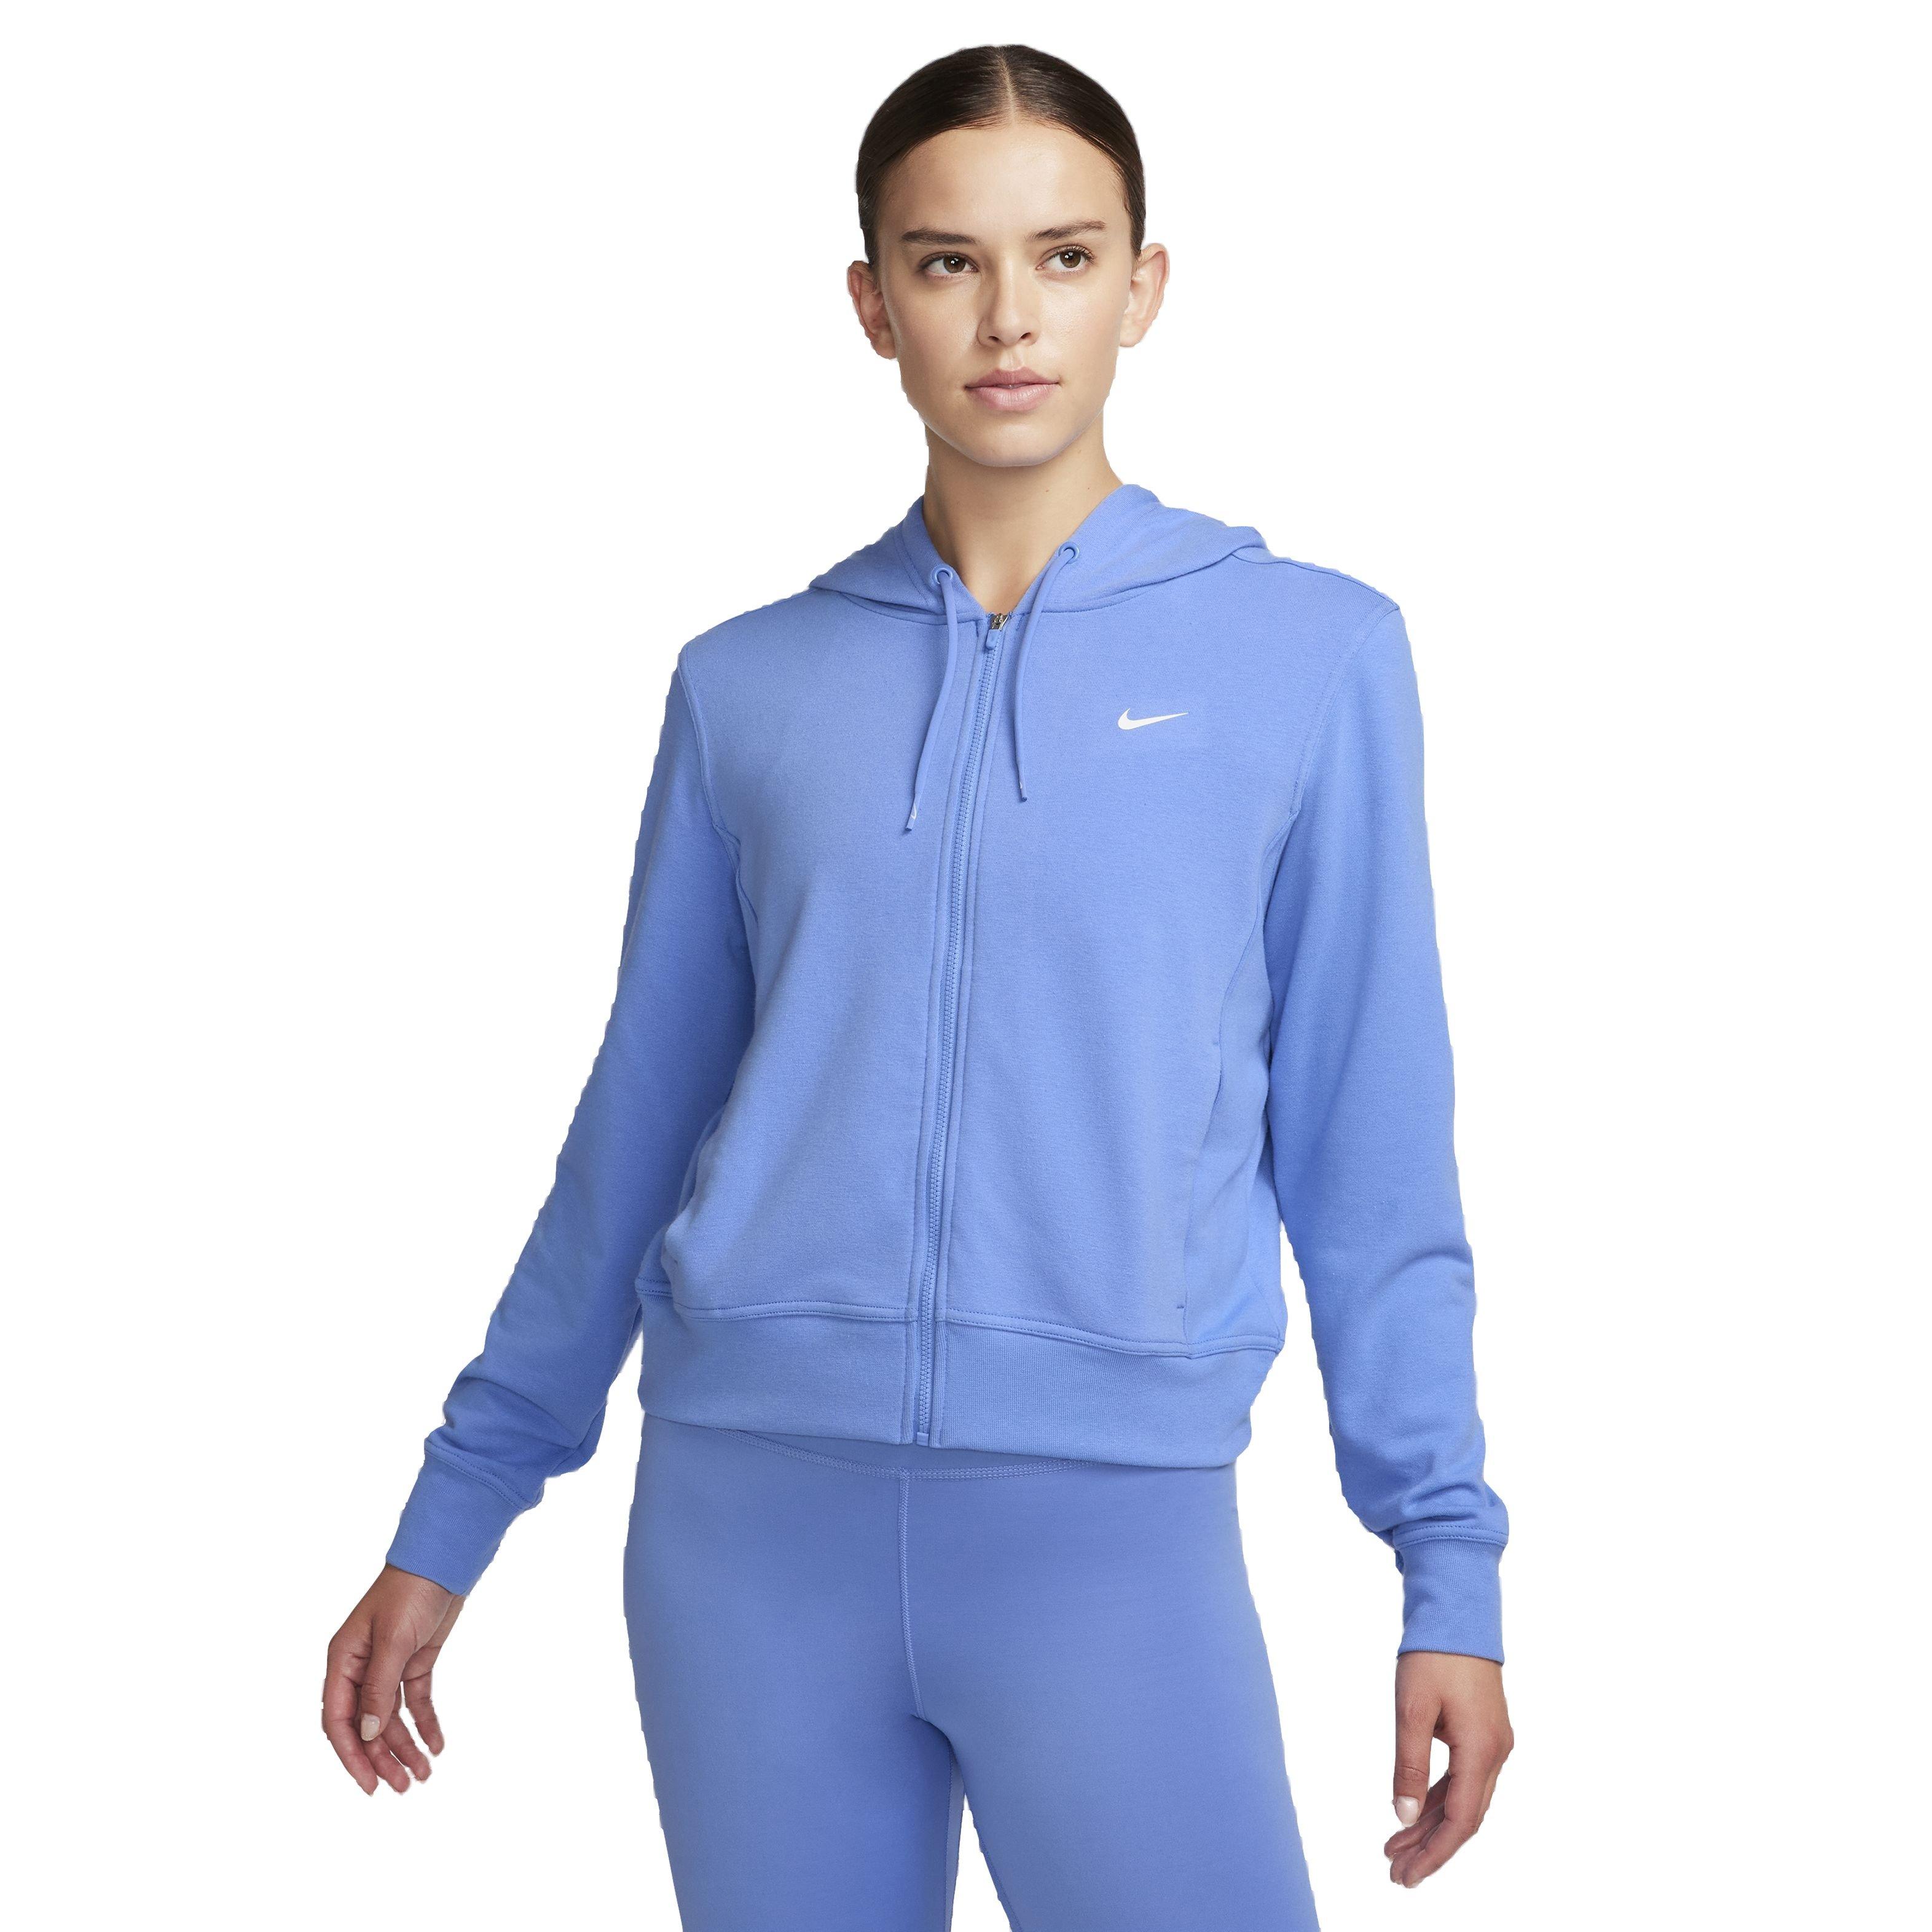 Nike Women's One Dri-FIT​ LBR French Terry Full-Zip Jacket